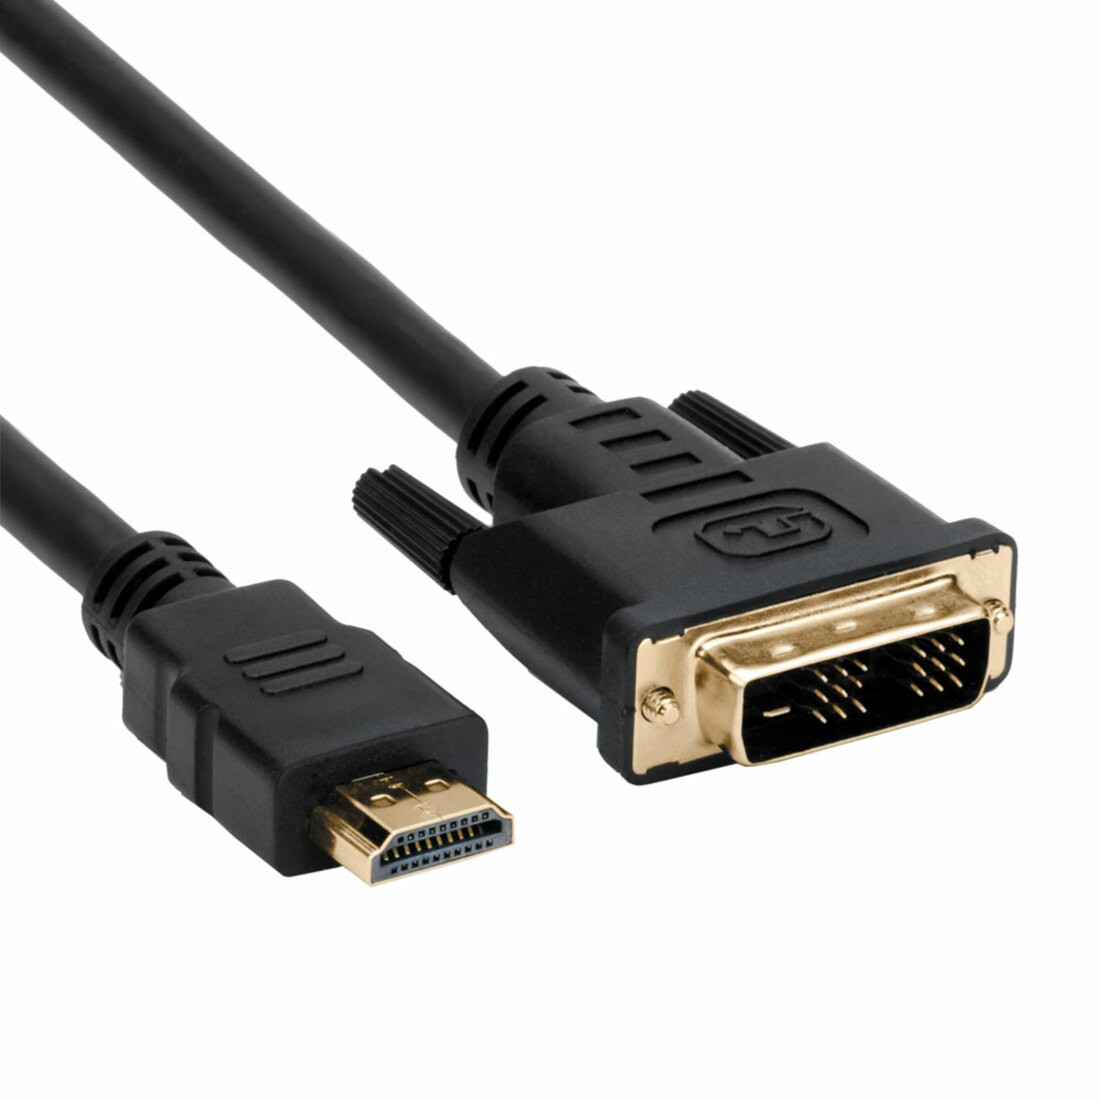 Barber Rykke Kabelbane Axiom HDMI to DVI-D Digital Video Cable M/M 15ft15 ft DVI-D/HDMI A/V Cable  for Desktop Computer, Notebook, Home Theater System, Audio...  HDMIMDVIDM15-AX - Corporate Armor